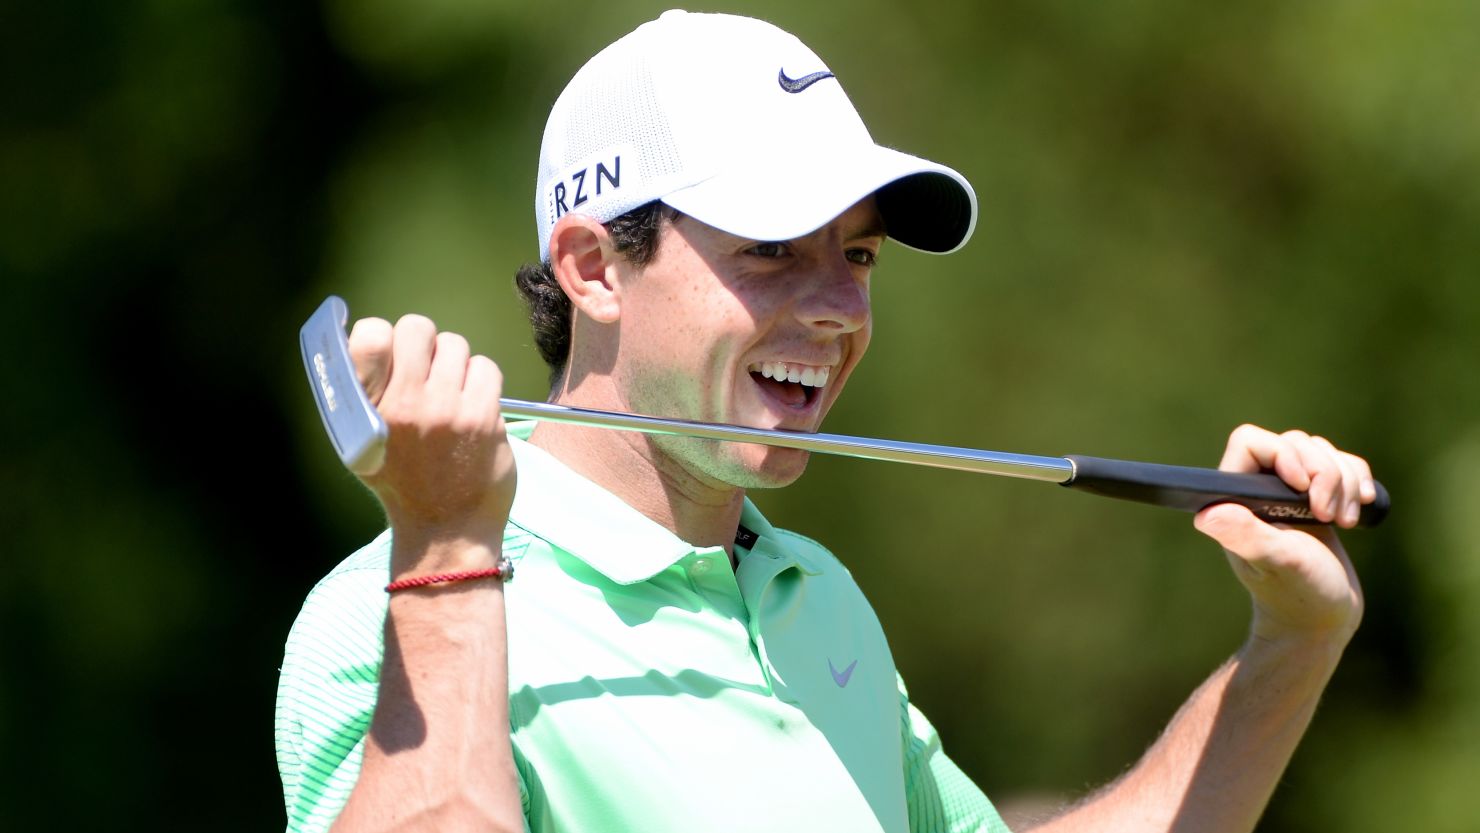 Rory McIlroy has announced he wants to represent Ireland at the Rio Olympics in 2016.